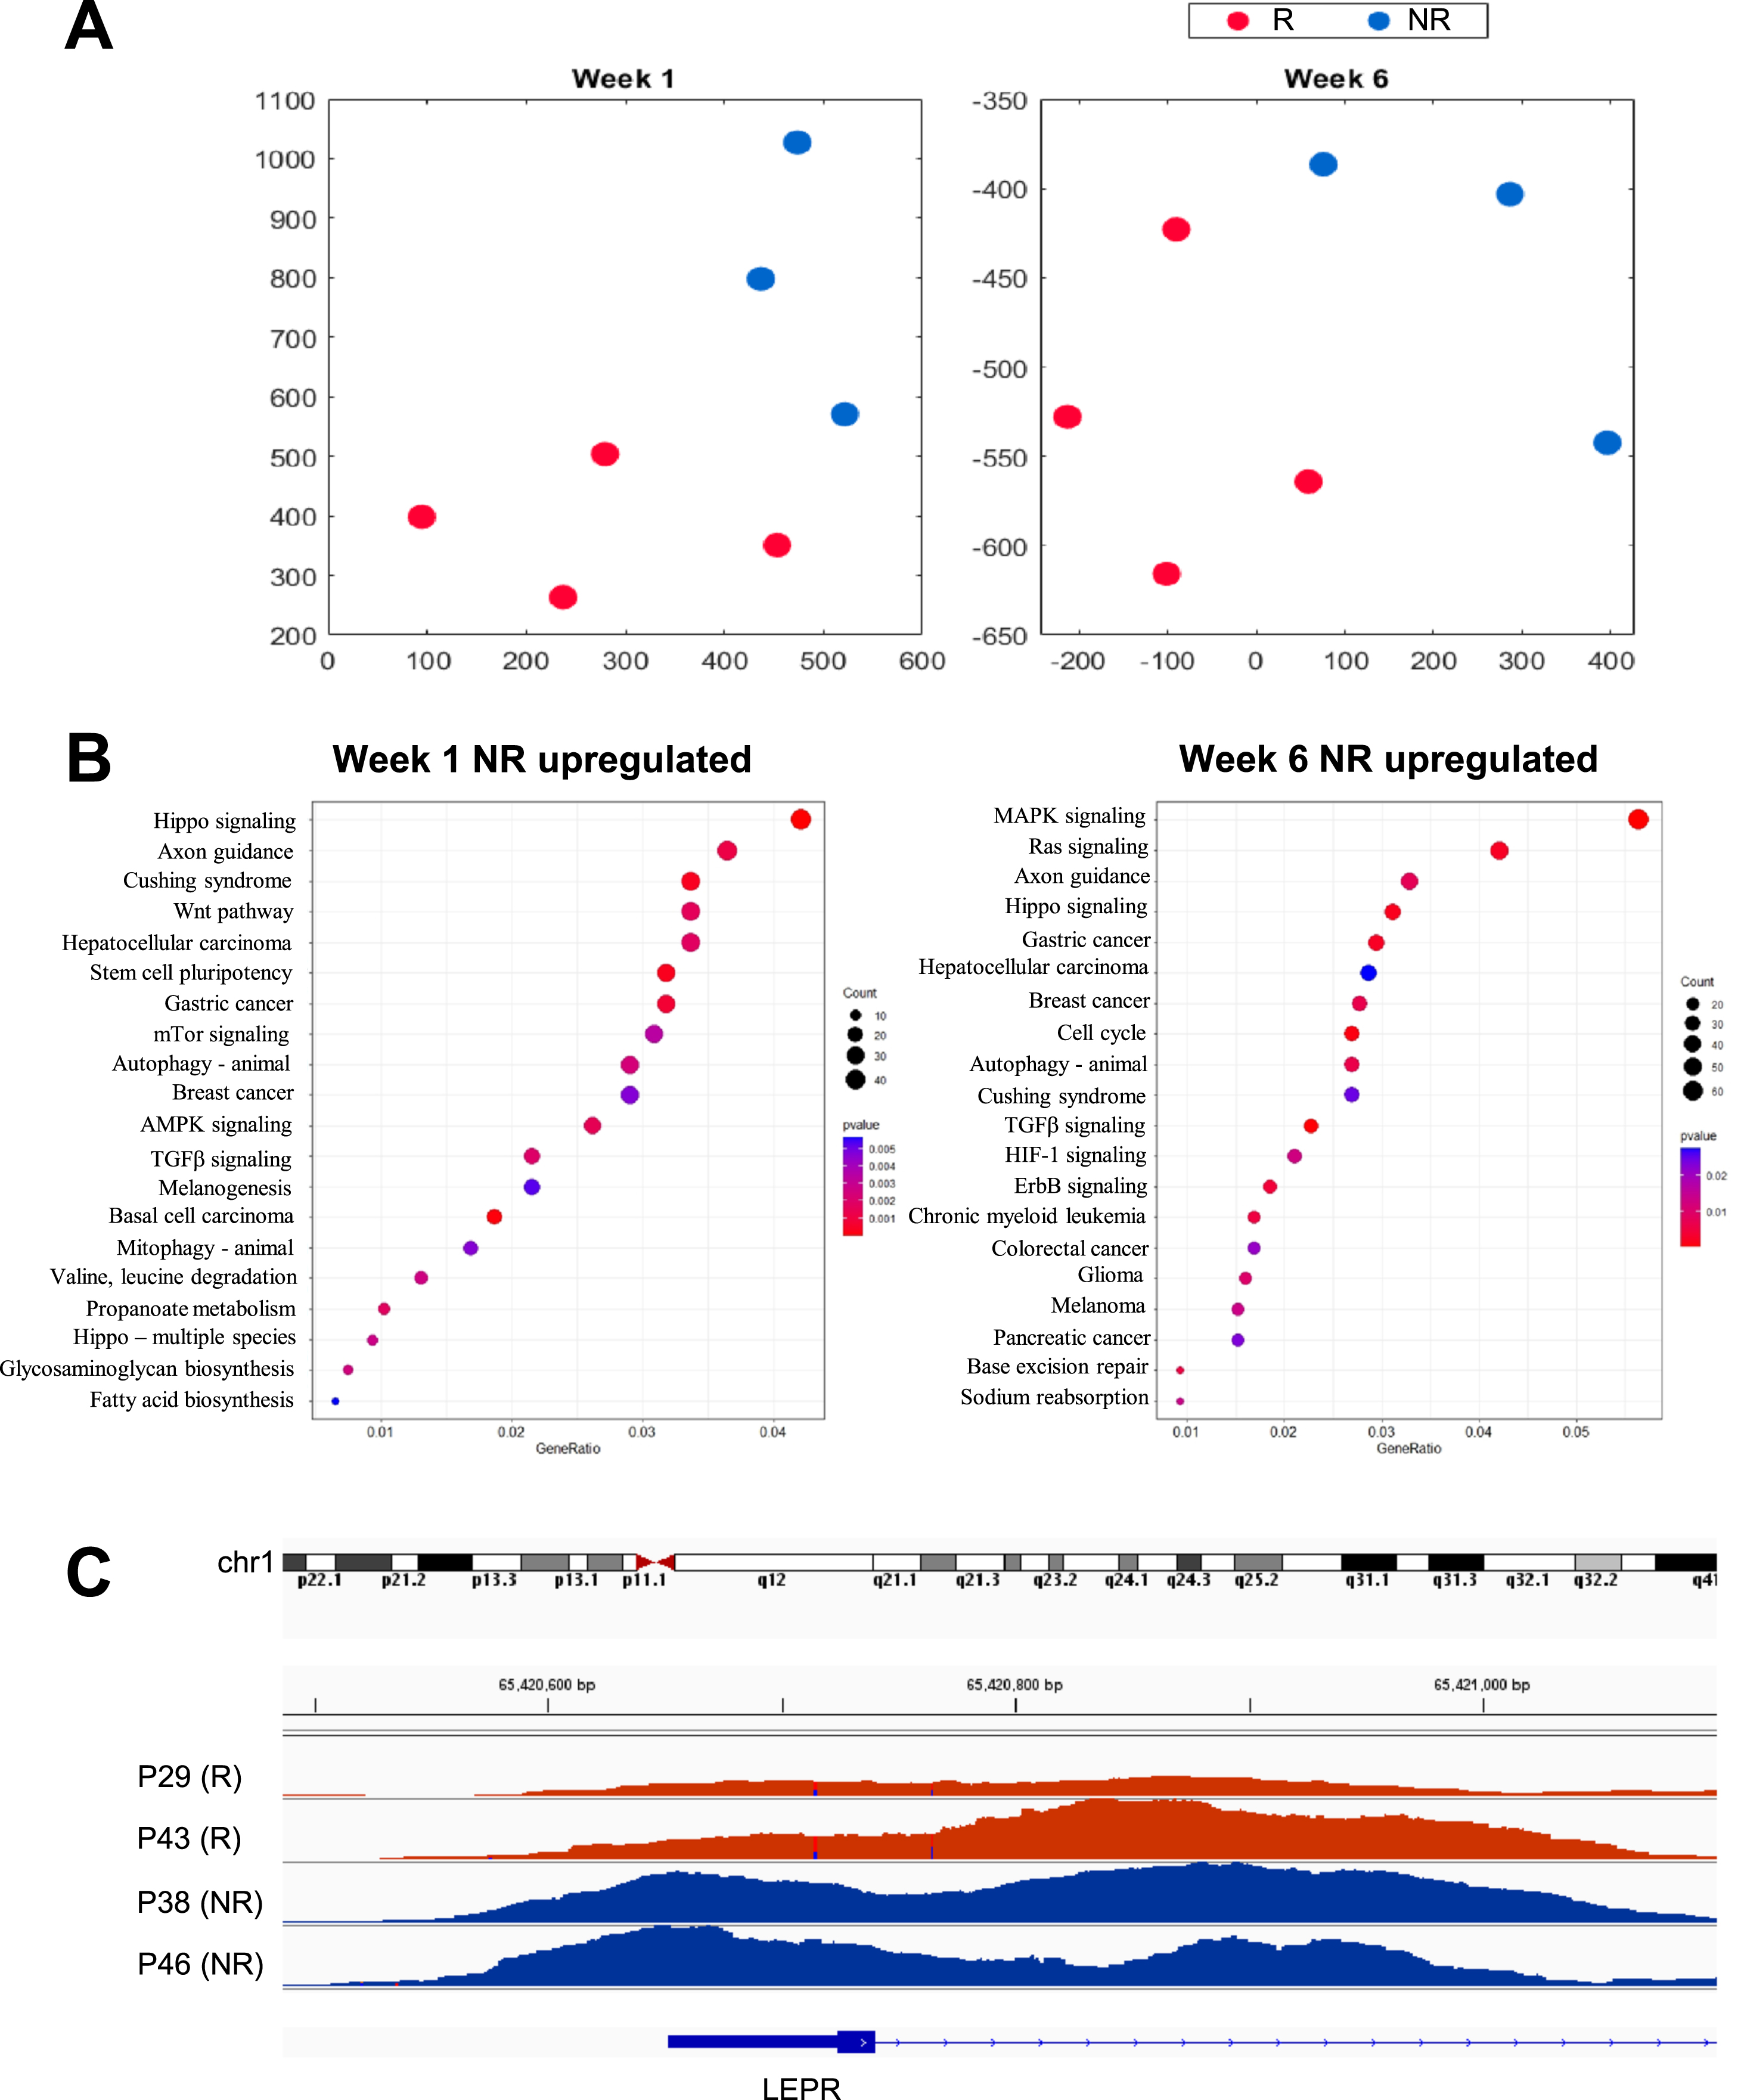 High-dimensional arrangement and pathway enrichment from H3K4me3 epigenomic profiles of monocytes from patients with NMIBC. A) Two-dimensional t-SNE embeddings of data from no early recurrence (NR, blue) and early recurrence (R, red) samples at week 1 (left panel) and week 6 (right panel). B) Gene Ontology (GO) terms mostly enriched among genes upregulated in recurrence-free patients at week1 one (left panel) and week 6 (right panel). C) Example of the LEPR promoter element that shows noticeable differences in monocytes from recurrence-free (blue) versus early recurrence (red) patients.